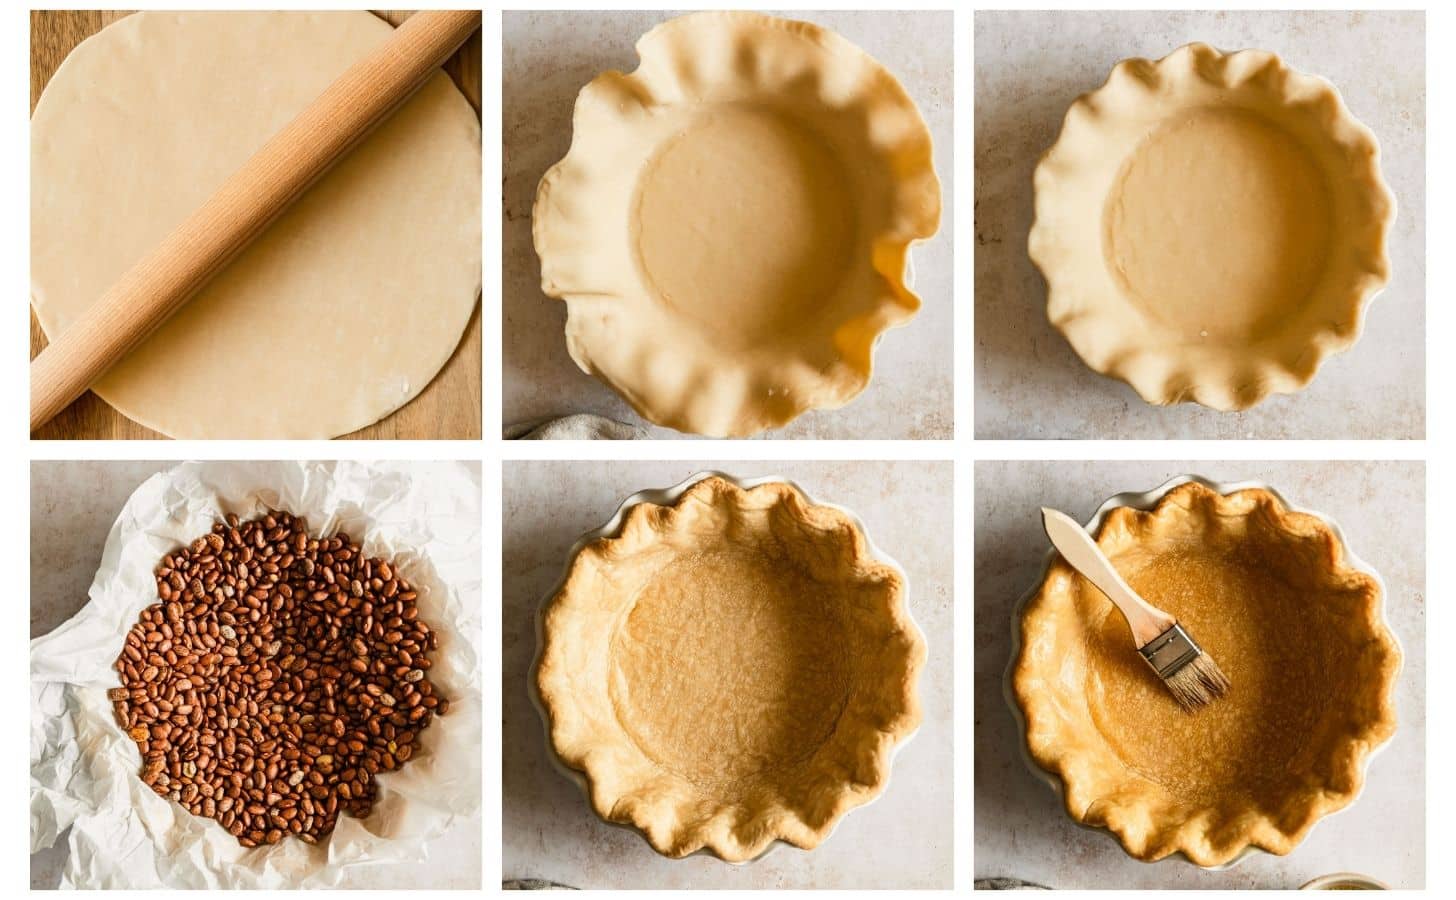 Six steps to par-baking pie crust. In photo 1, pie dough is rolled on a wood board. In photo 2, the pie dough is in a pie plate on a beige counter. In photo 3, the pie dough edges are crimped. In photo 4, the pie dough is filled with parchment paper and beans. In photo 5, the pie dough is par-baked. In photo 6, the pie dough is being brushed with egg wash.